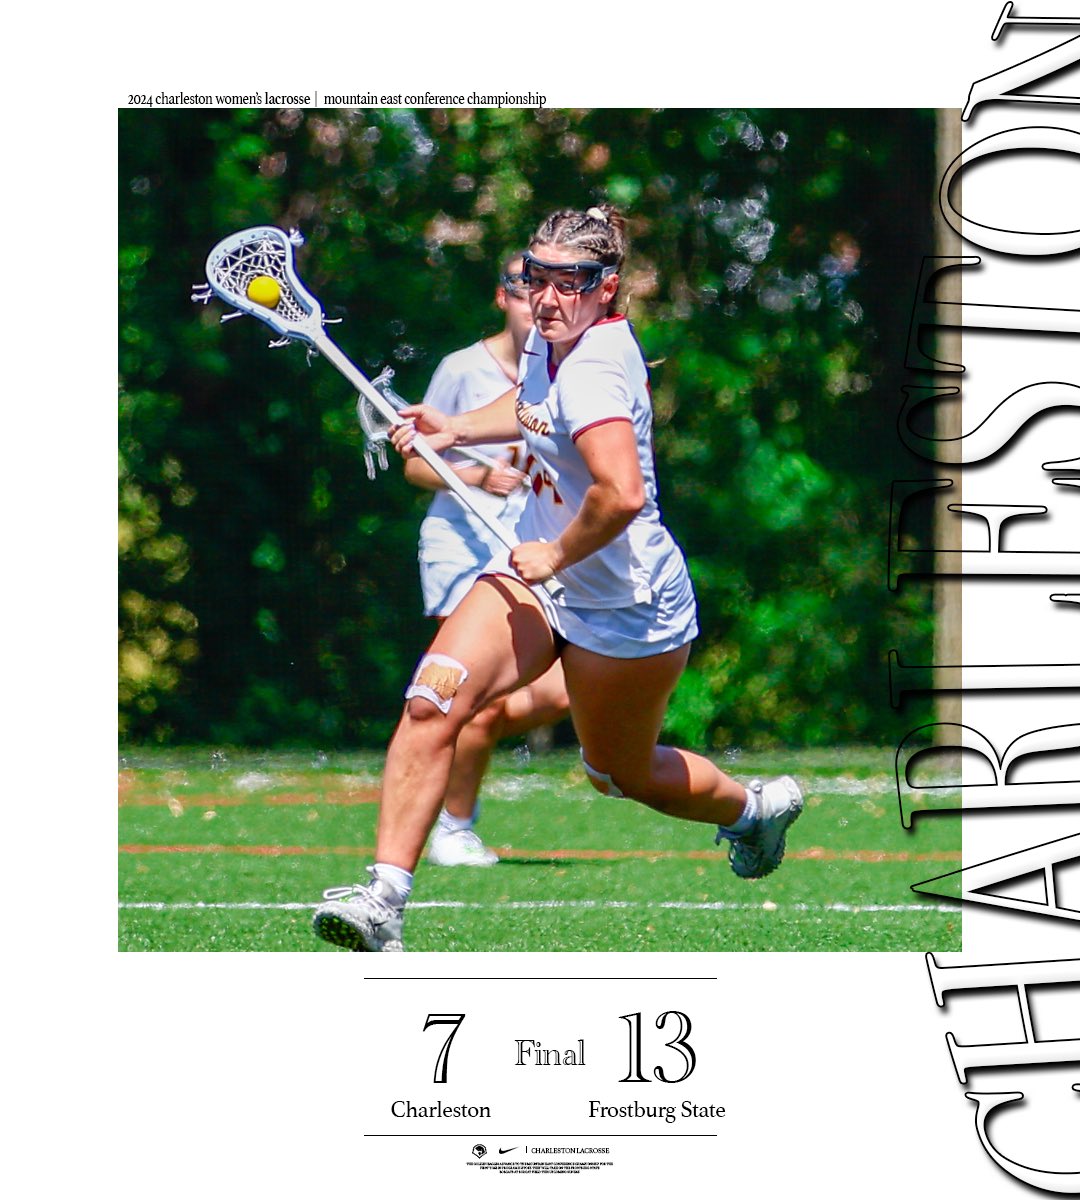 🥍 Charleston’s season comes to a close in their first Mountain East Conference Championship appearance. Great season Golden Eagles 🦅 #WingsUp